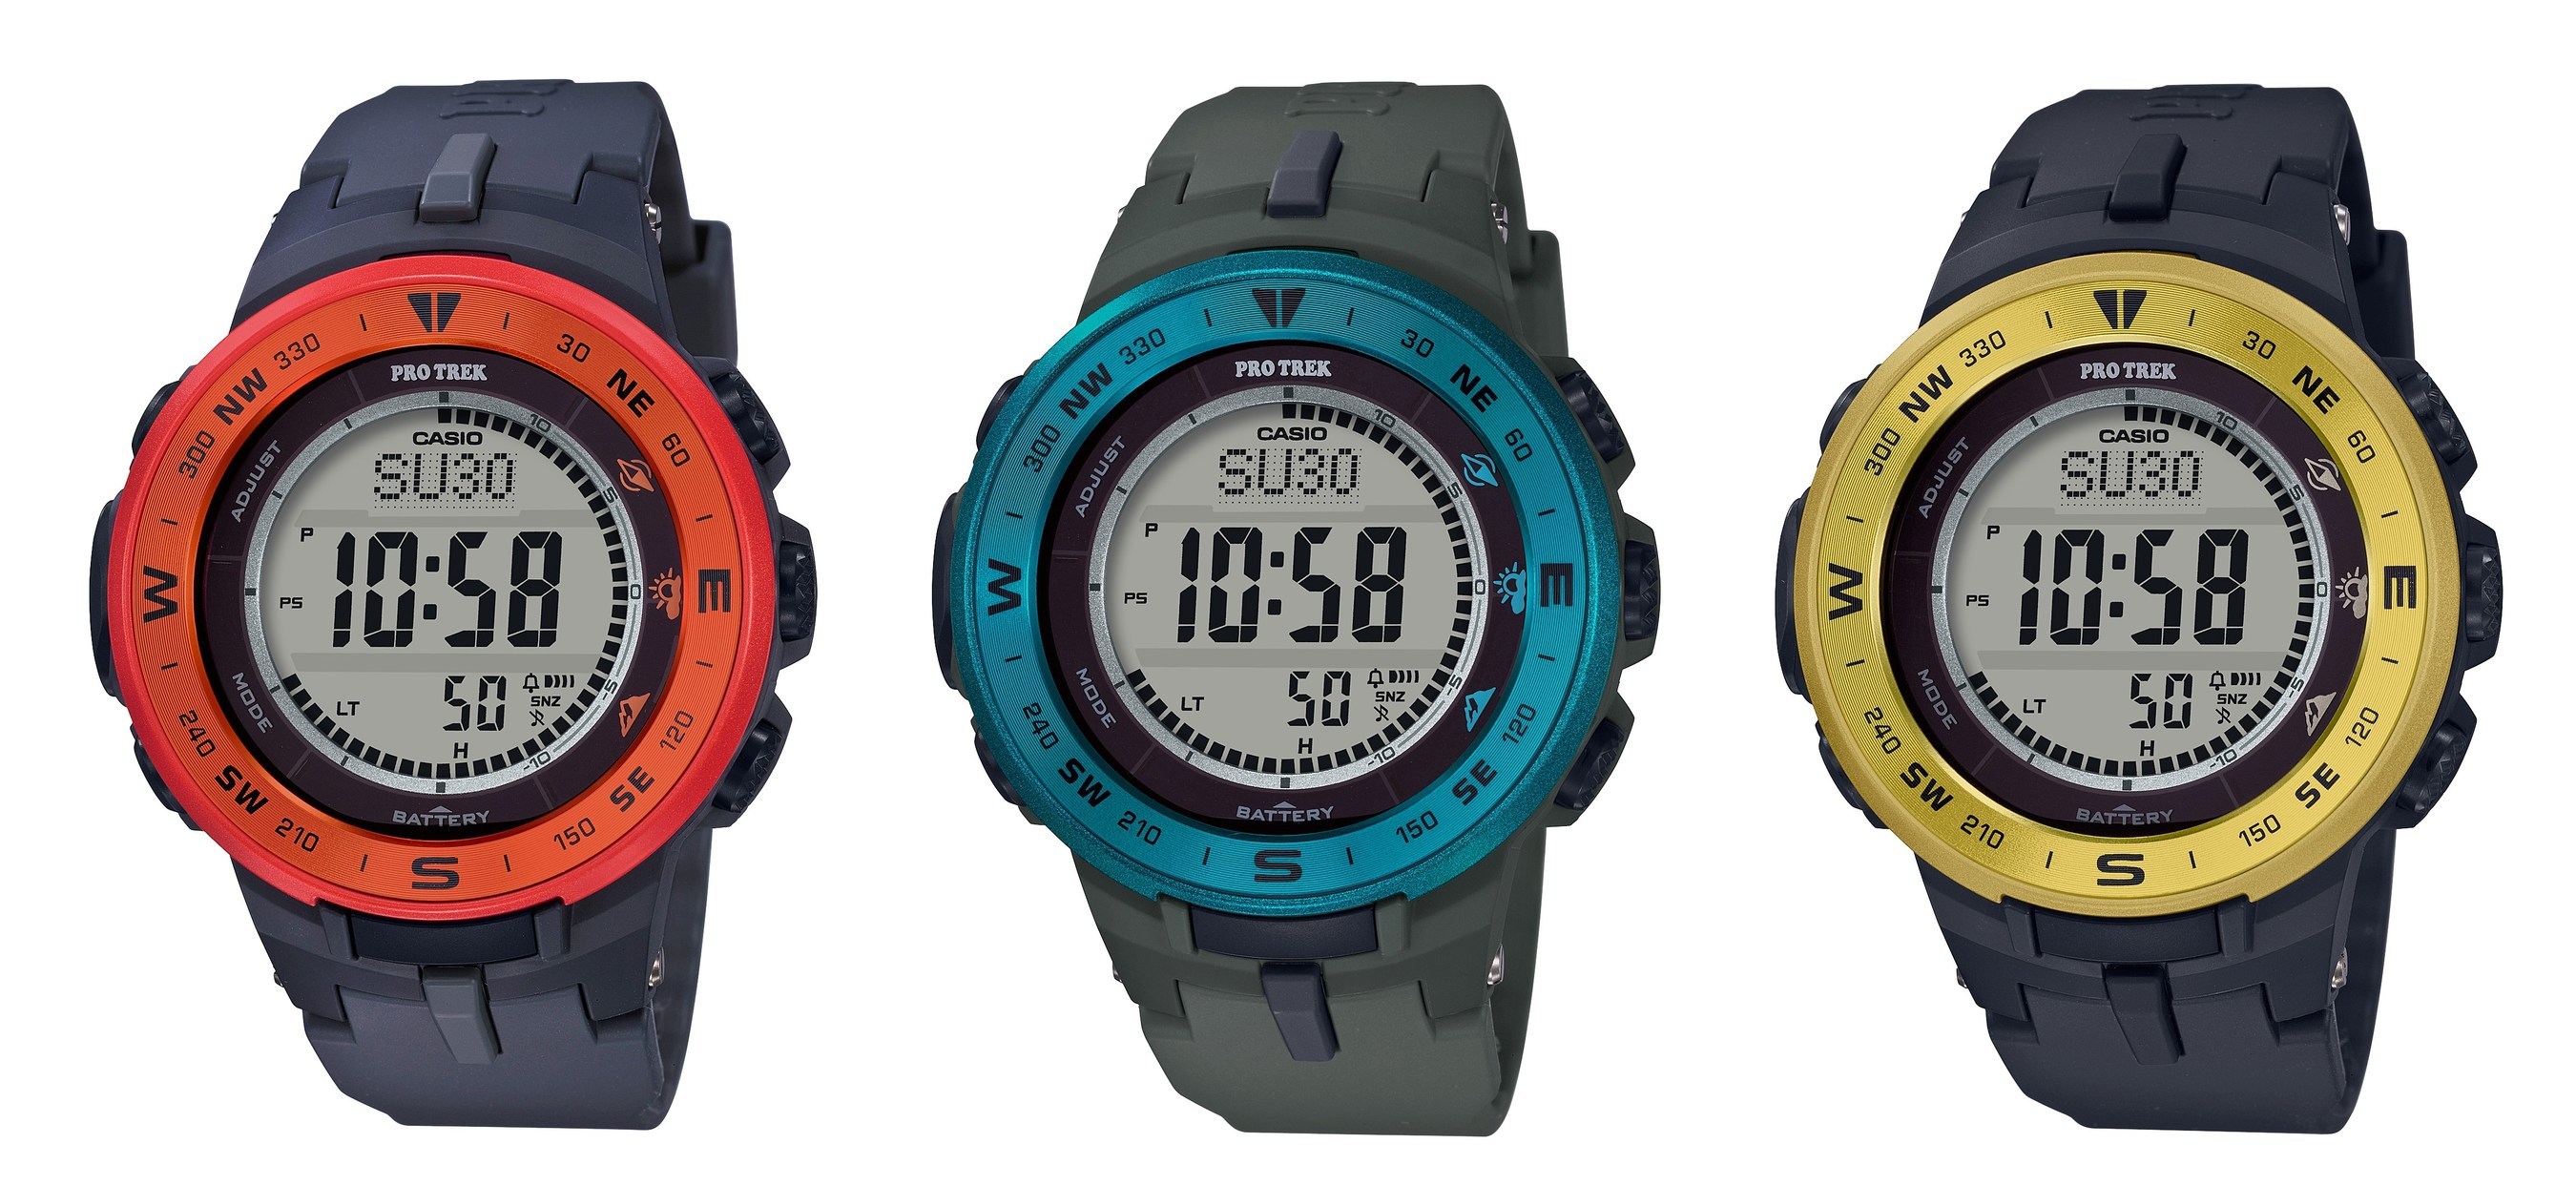 Casio Adds A Pop Of Color To PRO TREK Series